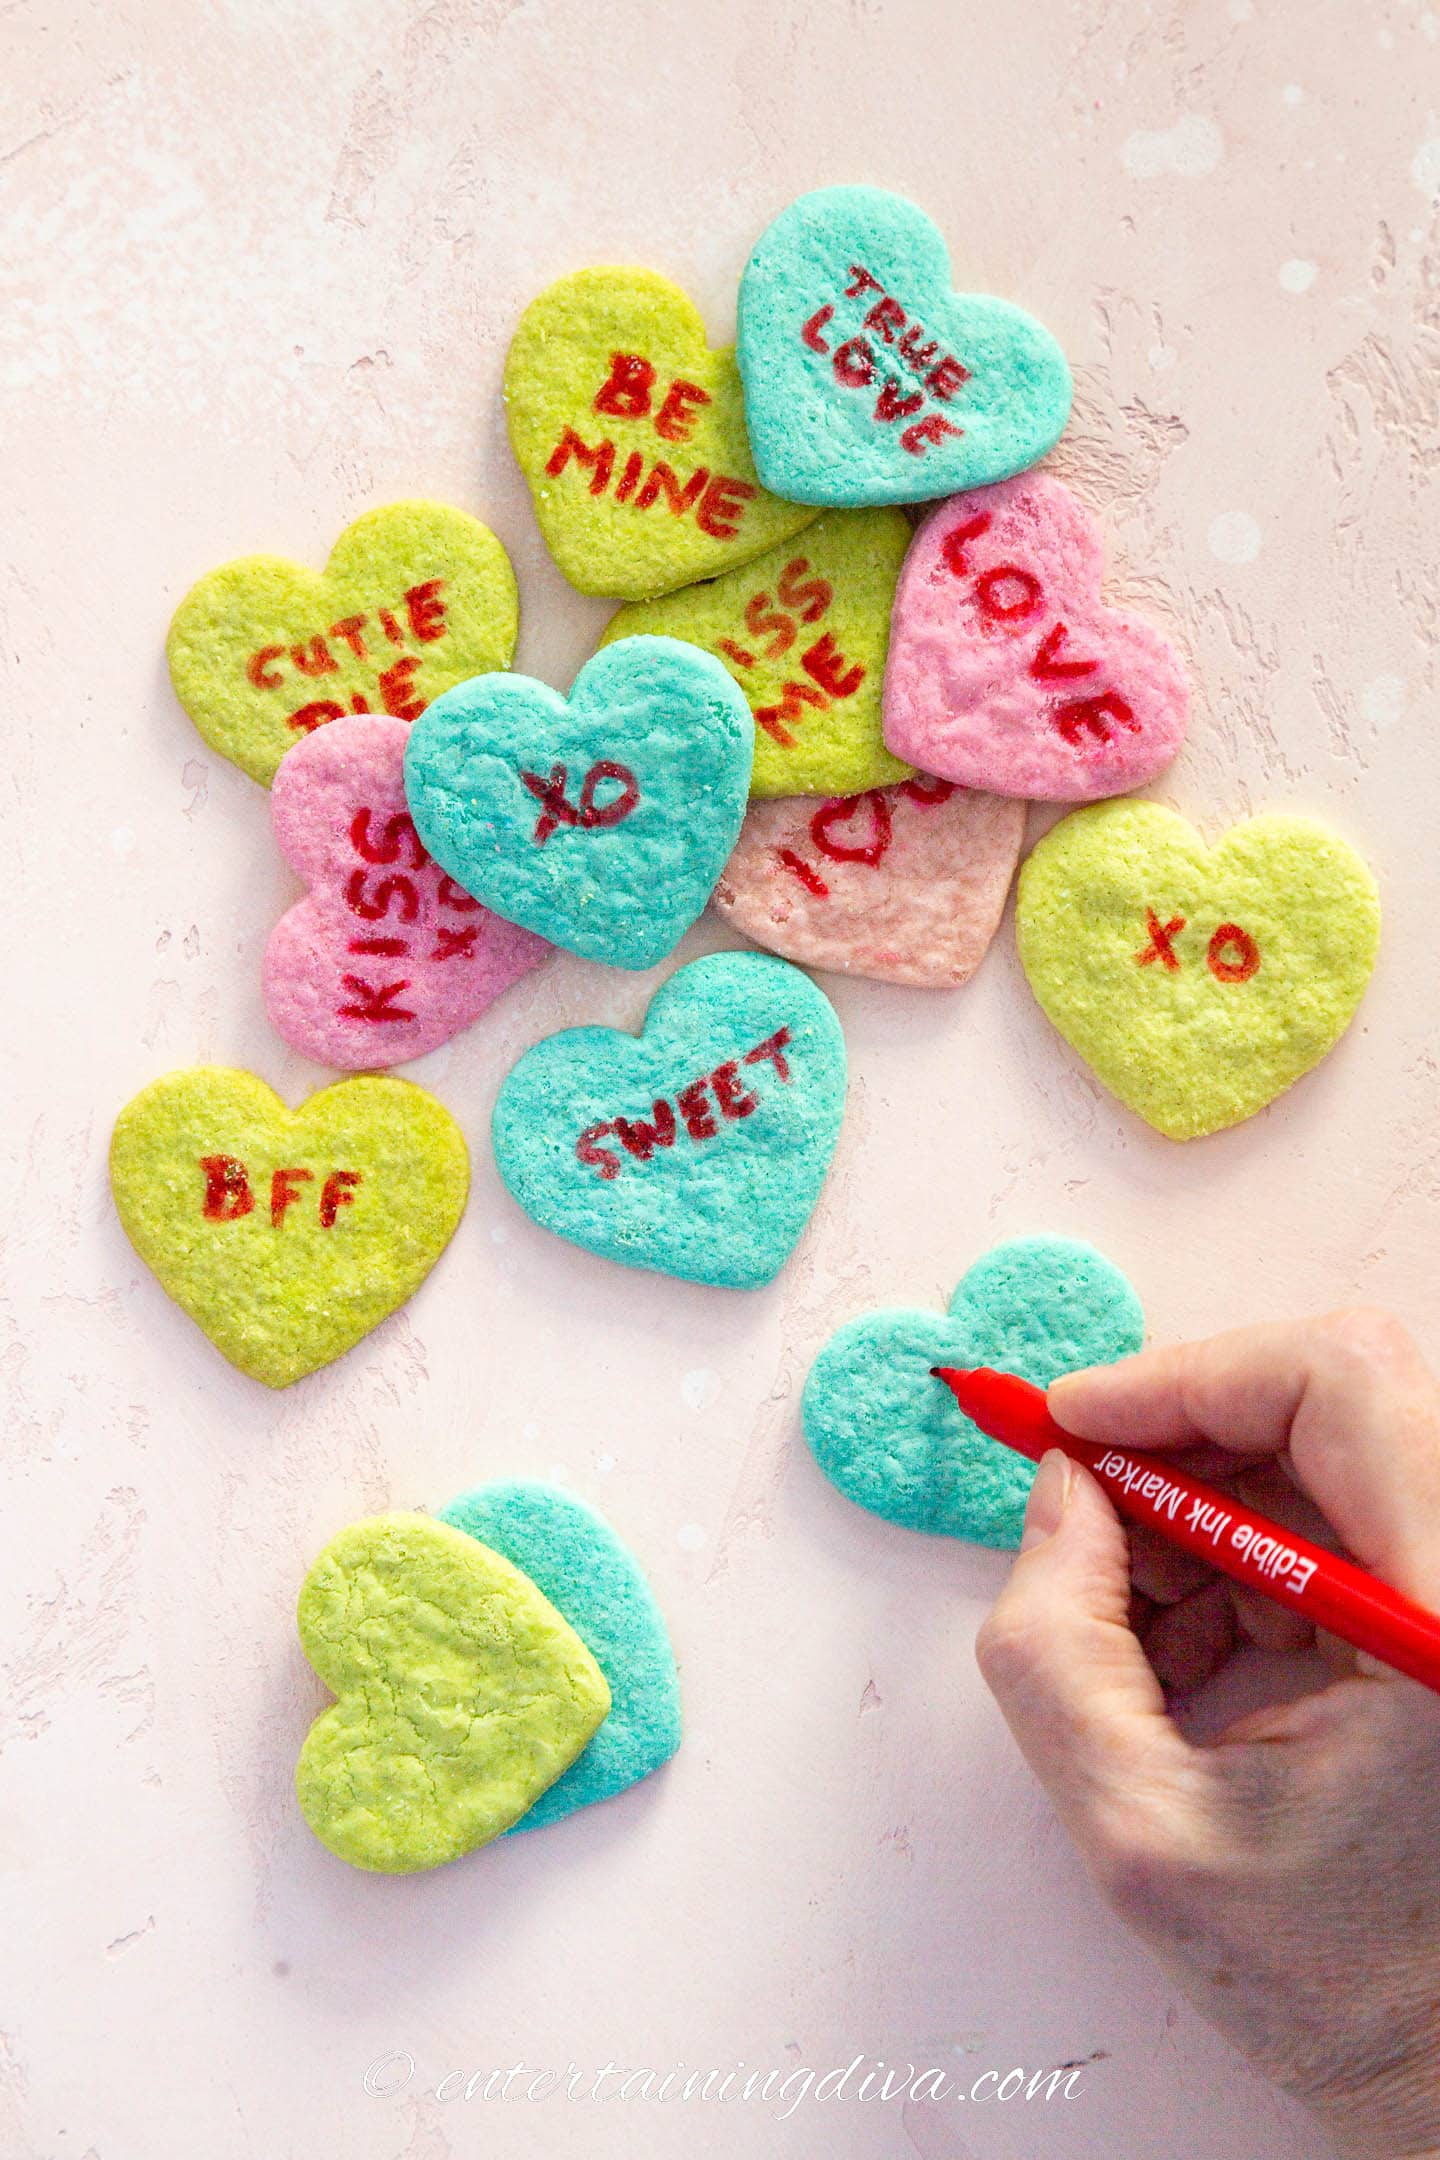 Sayings being written on a blue conversation heart with a red edible ink marker